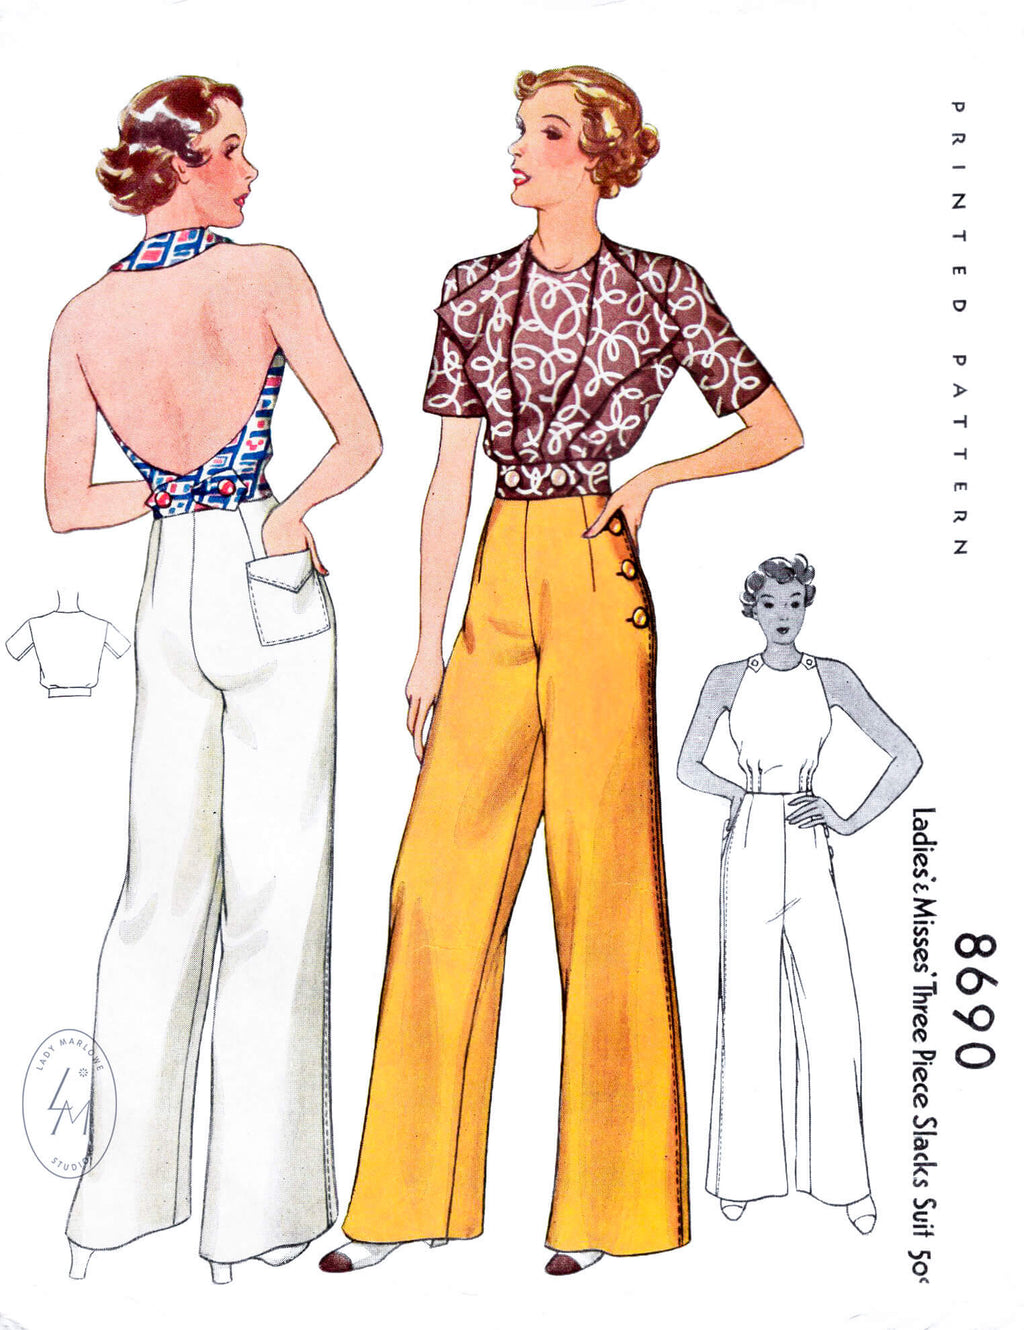 McCall 8690 1930s 1936 sailor trousers, slacks, halter top, and bolero jacket vintage sewing pattern reproduction